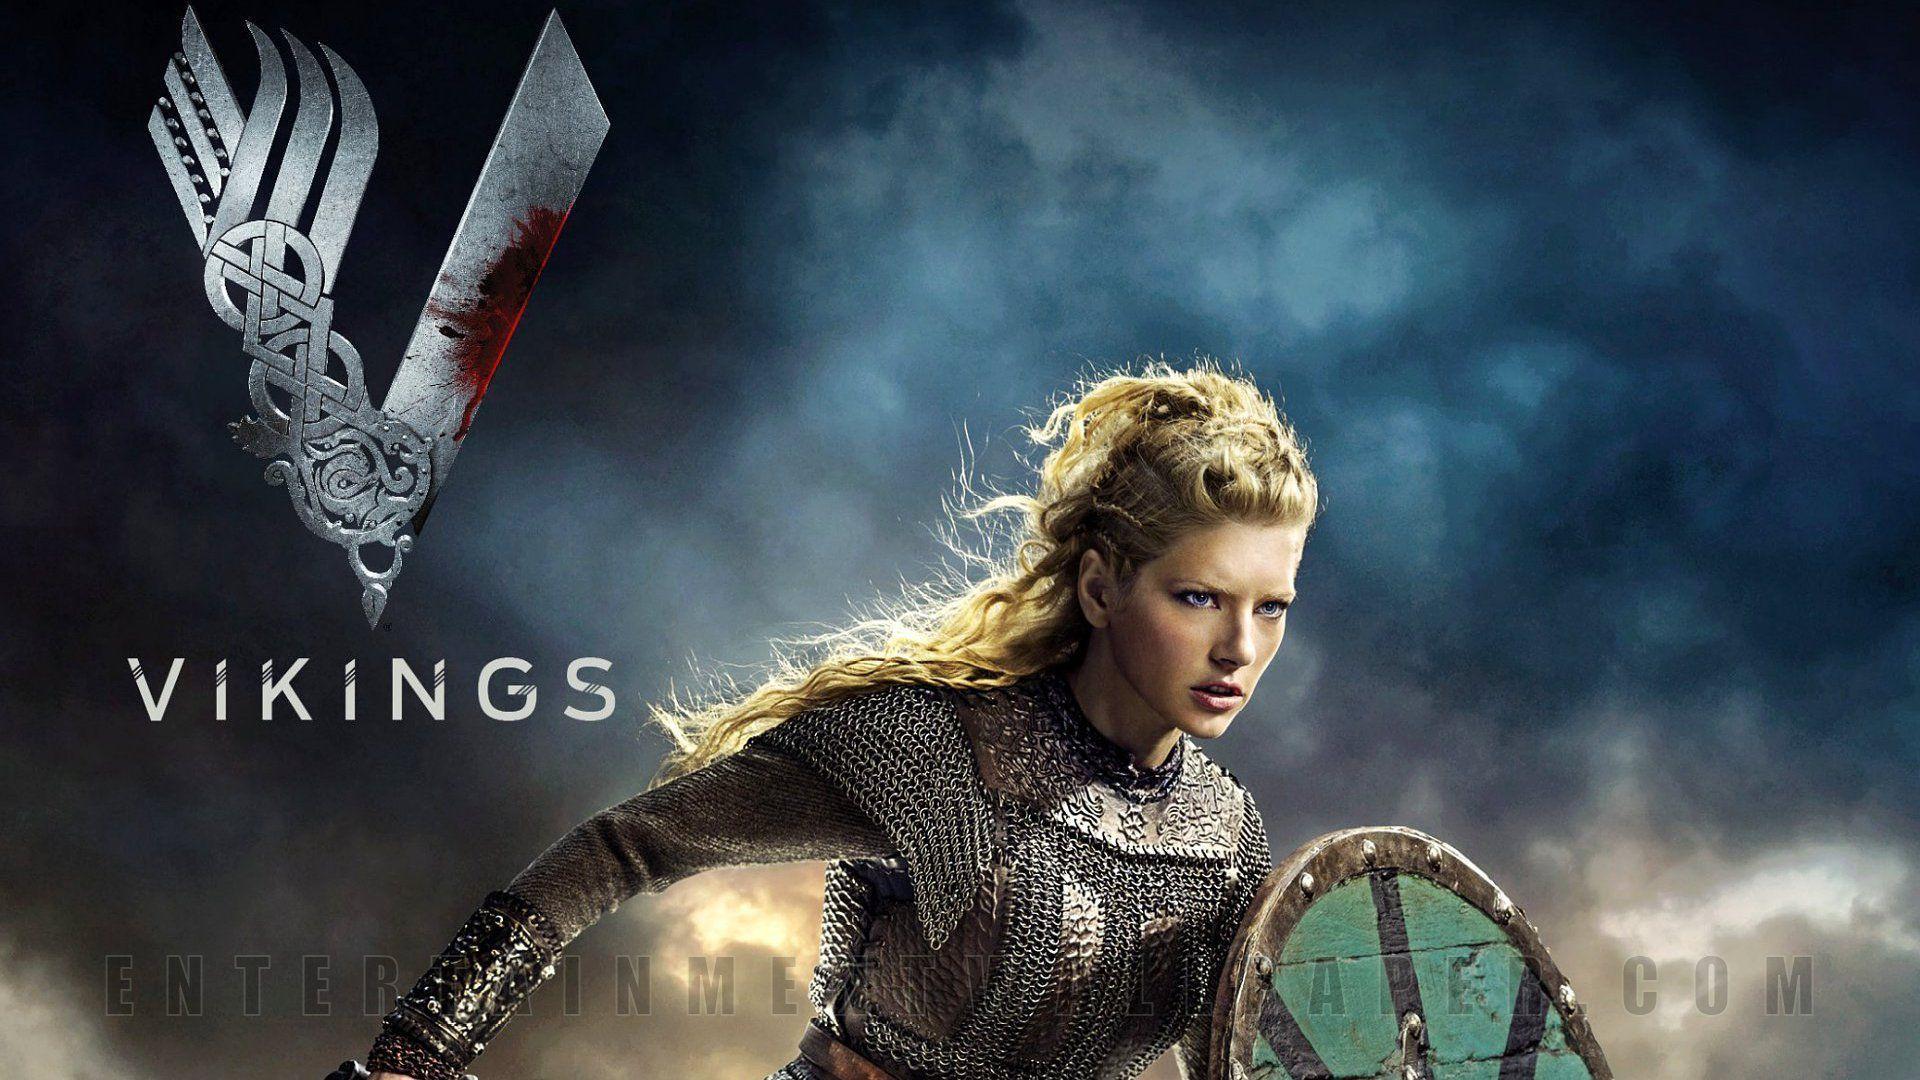 Vikings Tv Show Wallpapers 40038 in Movies